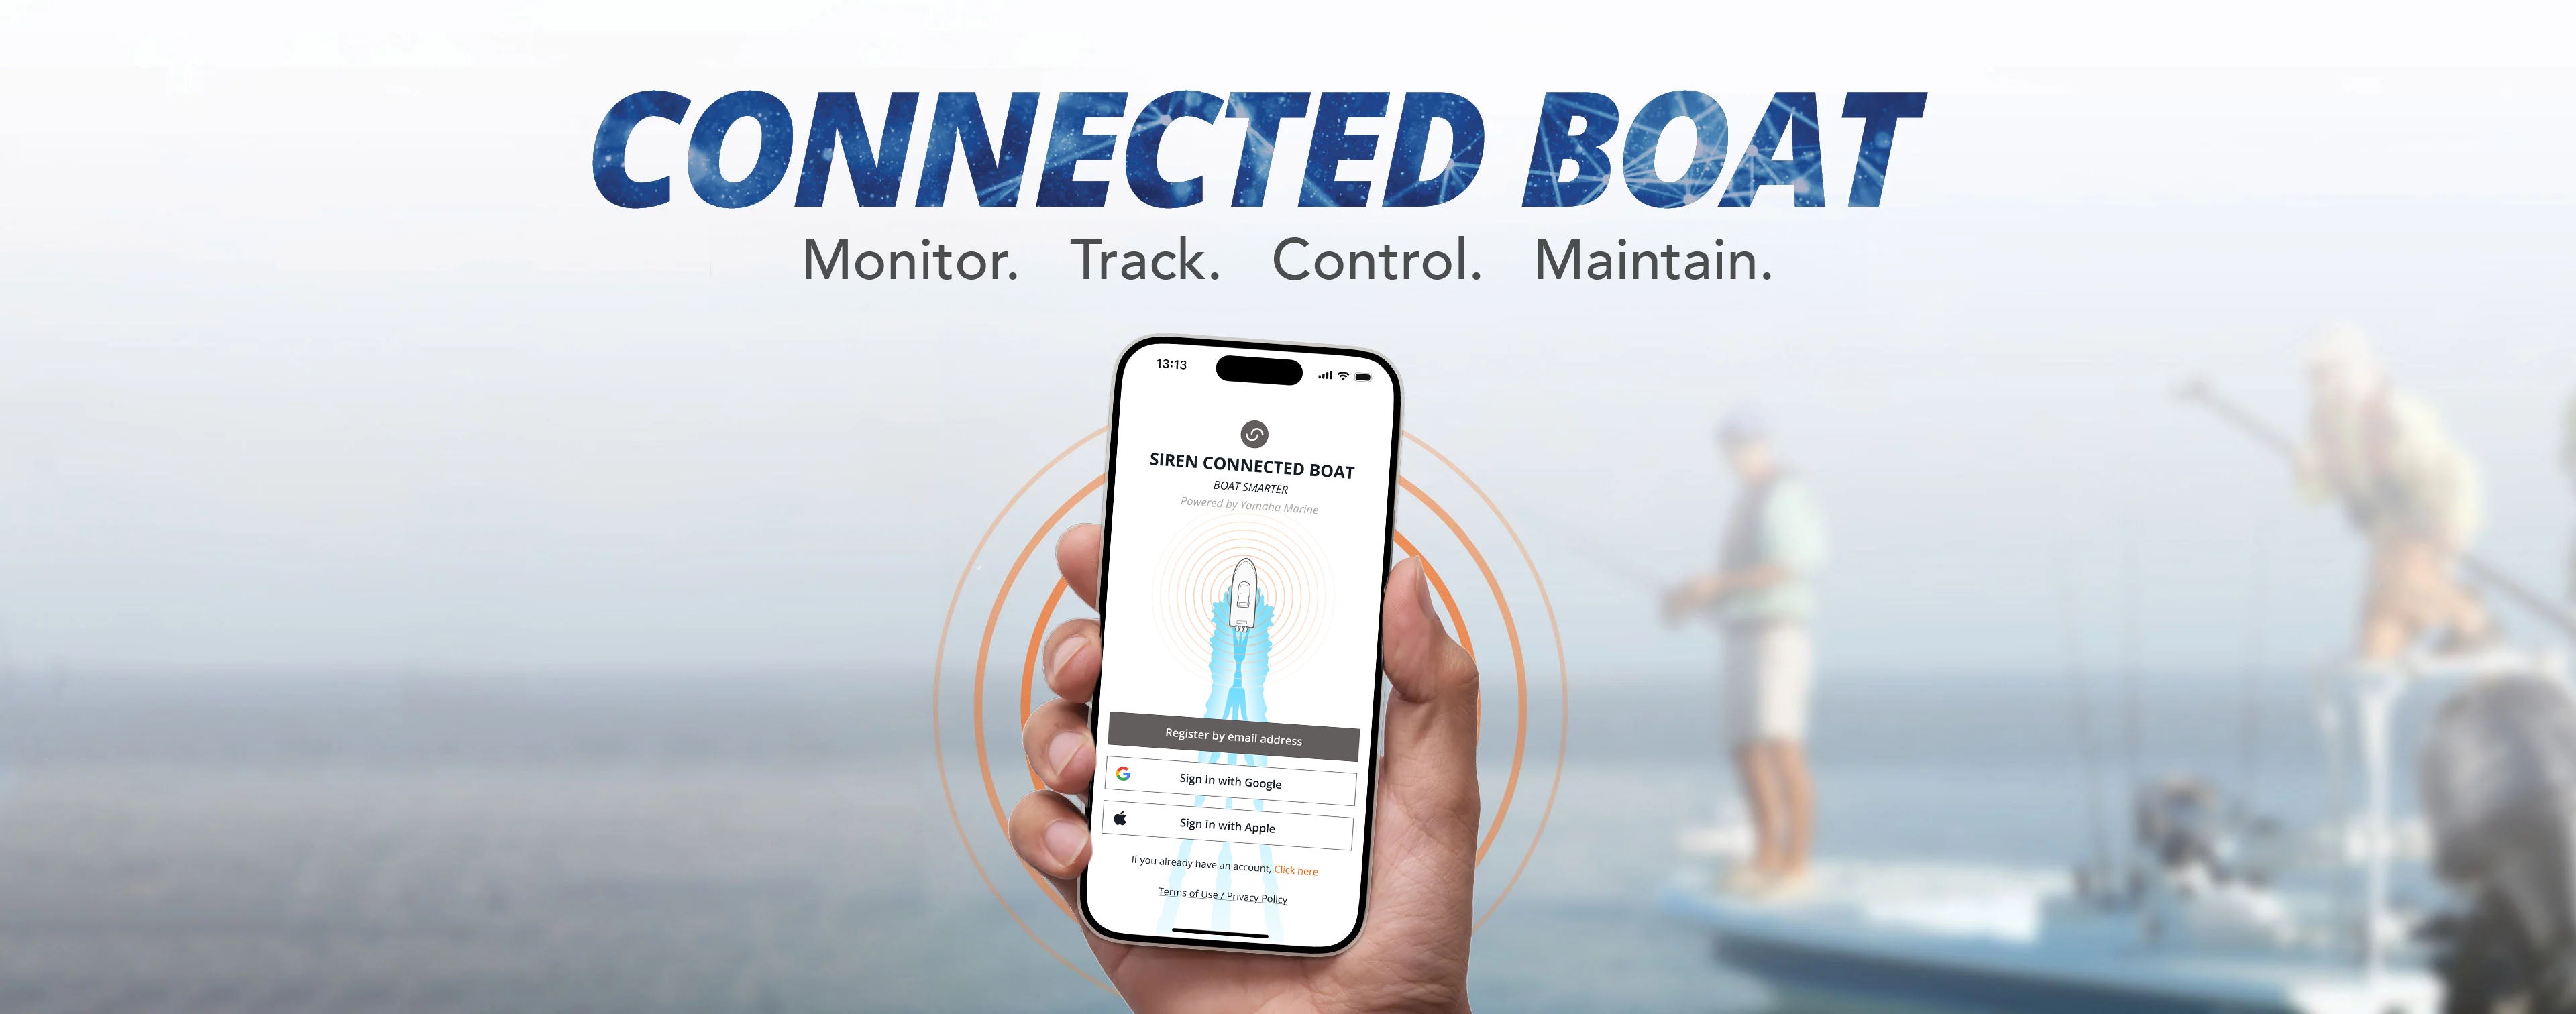 Your home is smart. Your boat should be too.